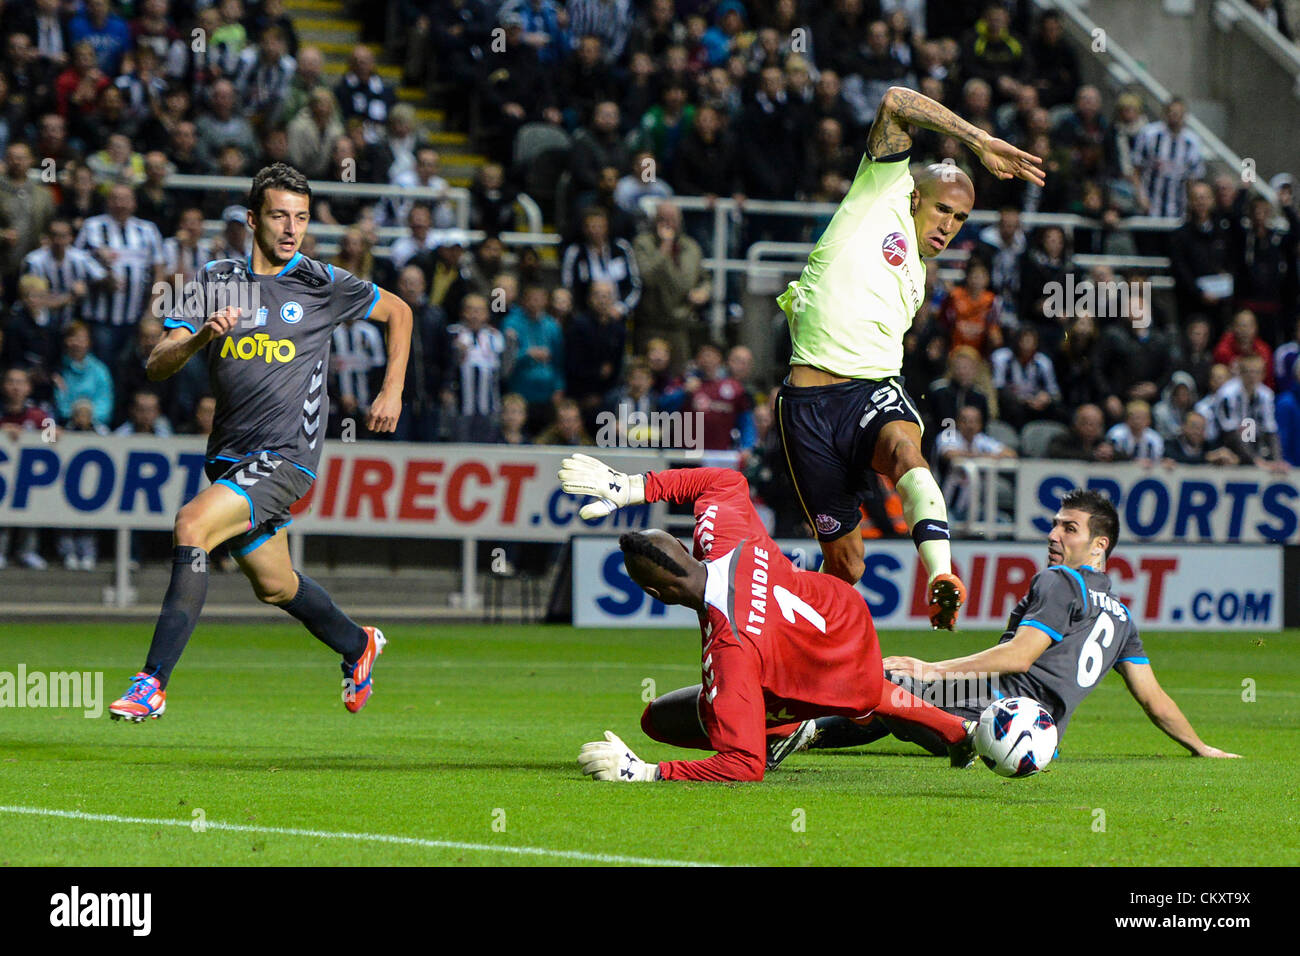 Newcastle, England. 30th Aug 2012. Newcastle's Gabriel Obertan leaps over Goal Keeper Charles Itandje and Sokratis Fytanidis during the Europa League Qualifying 2nd leg tie between Newcastle United and Atromitos from St James Park. Stock Photo